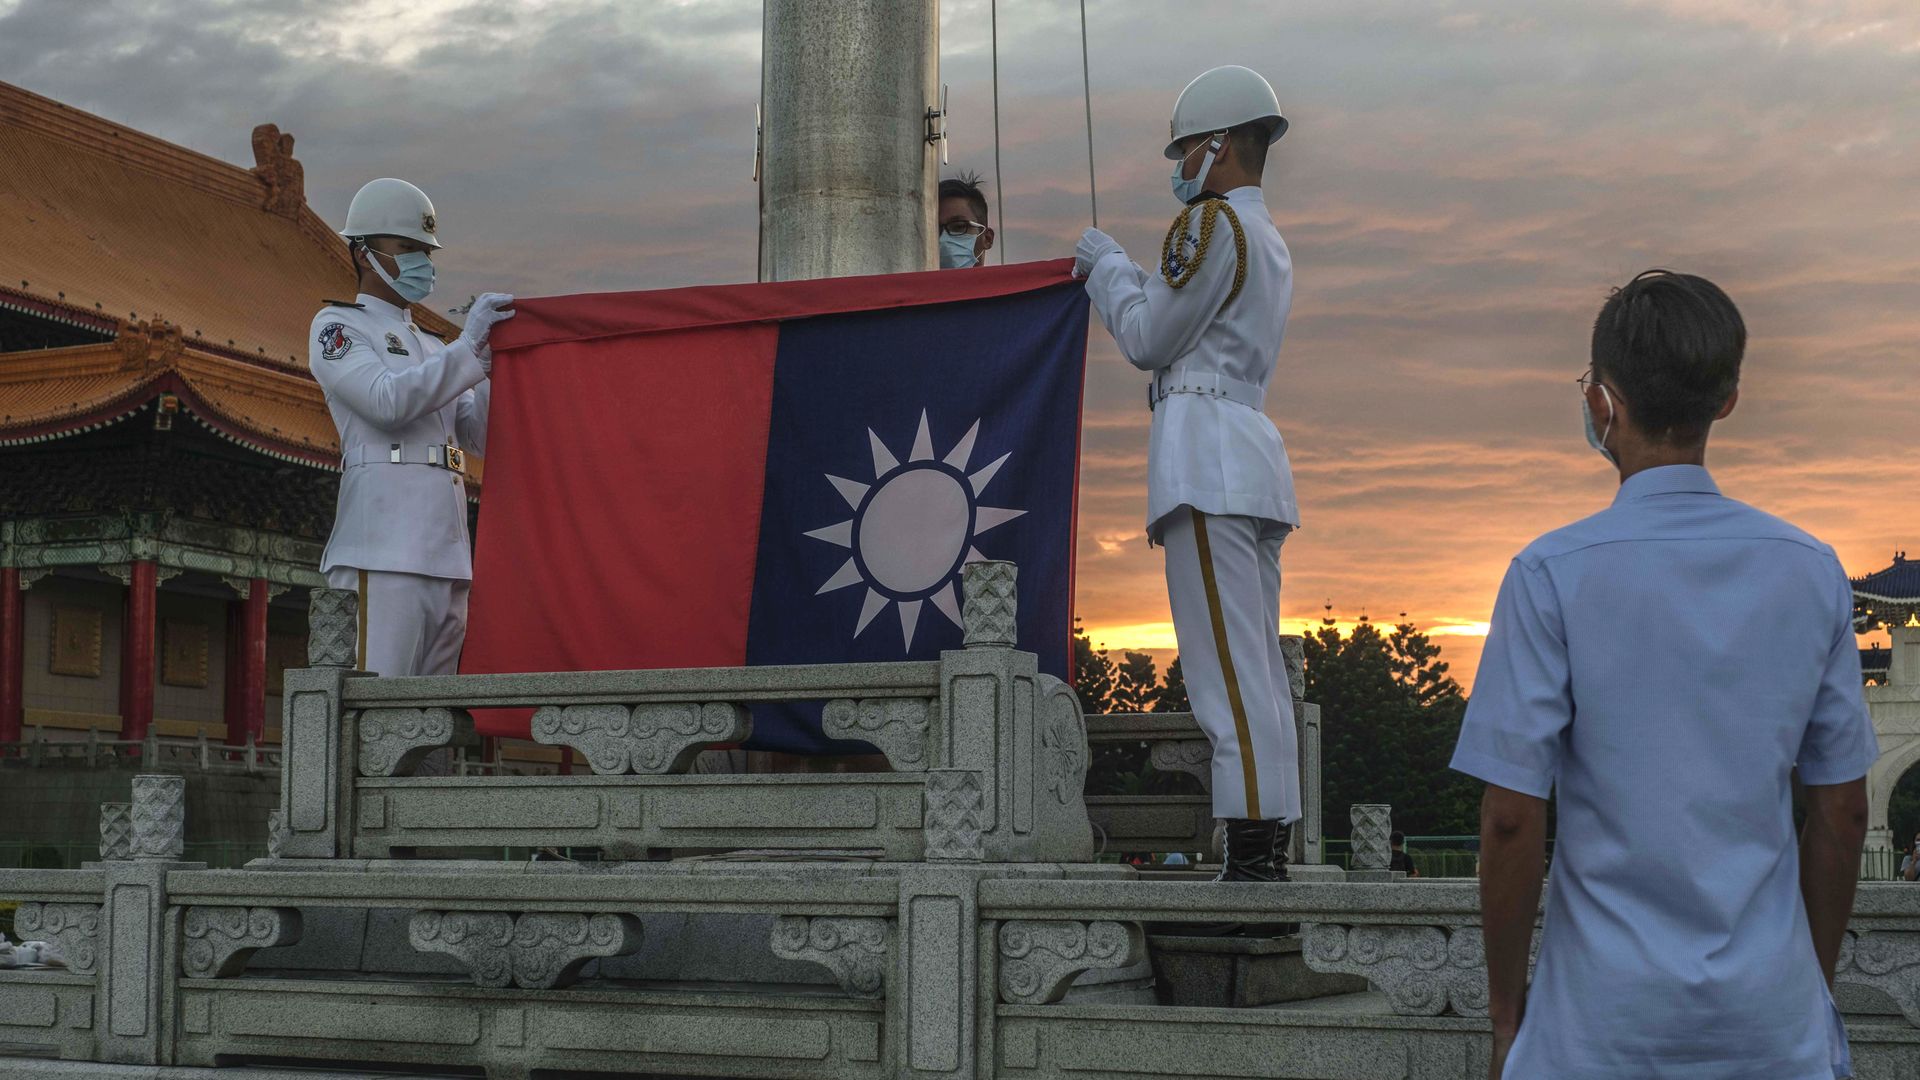 Soldiers lower the Taiwanese flag during a ceremony at the Chiang Kai-shek Memorial Hall in Taipei, Taiwan, in August. Photo: Lam Yik Fei/Bloomberg via Getty Images